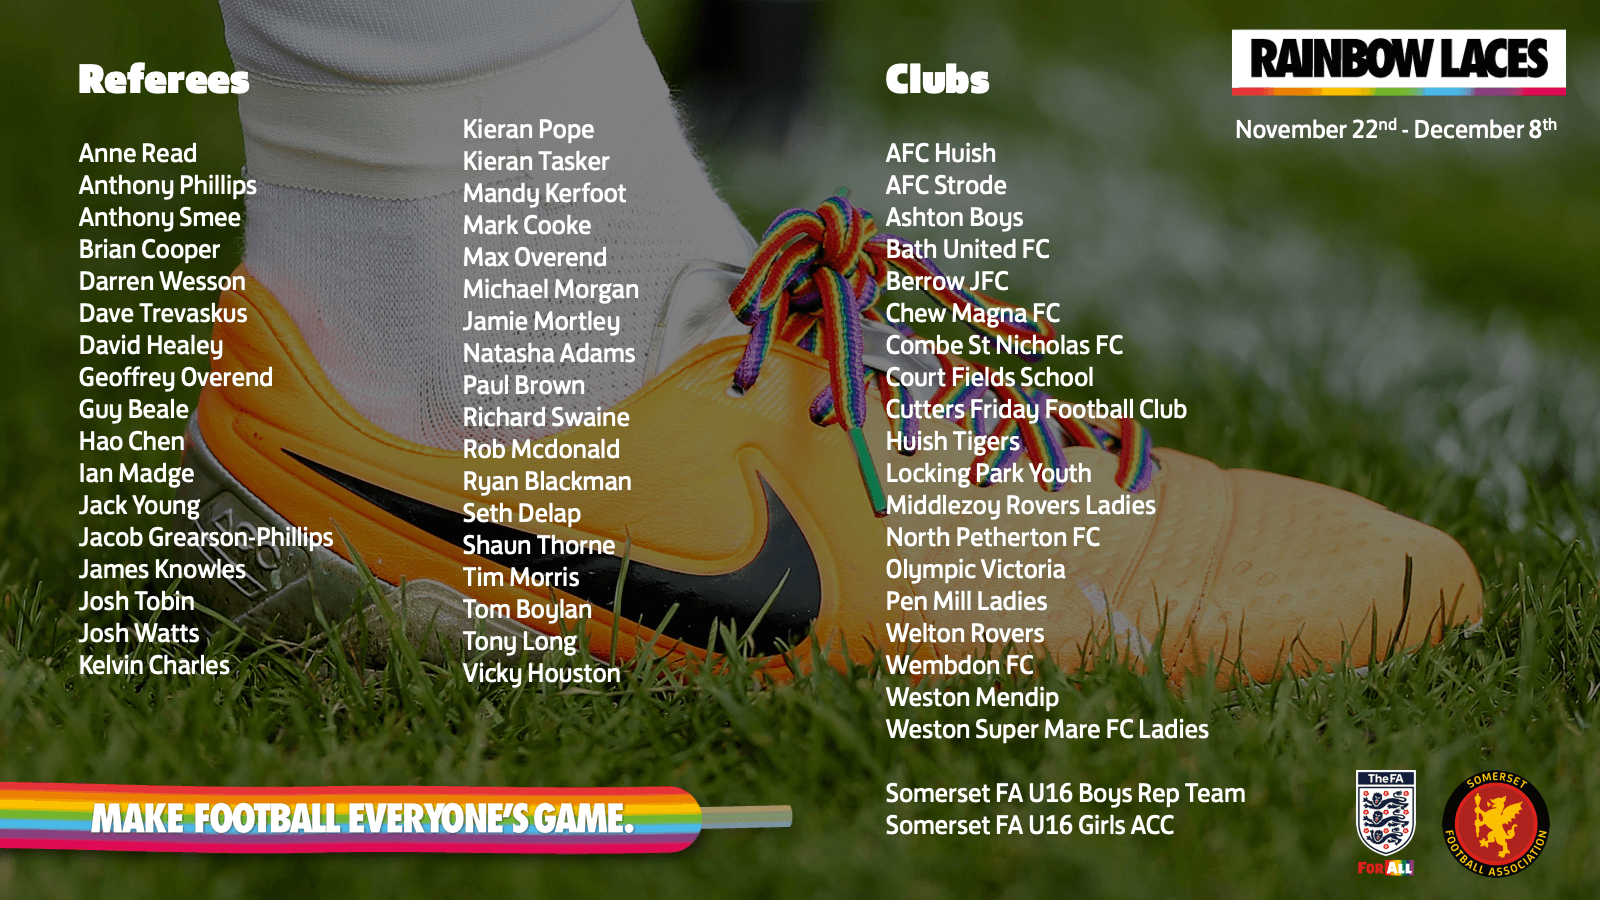 Somerset Rainbow Laces Clubs and Refs (1).png	